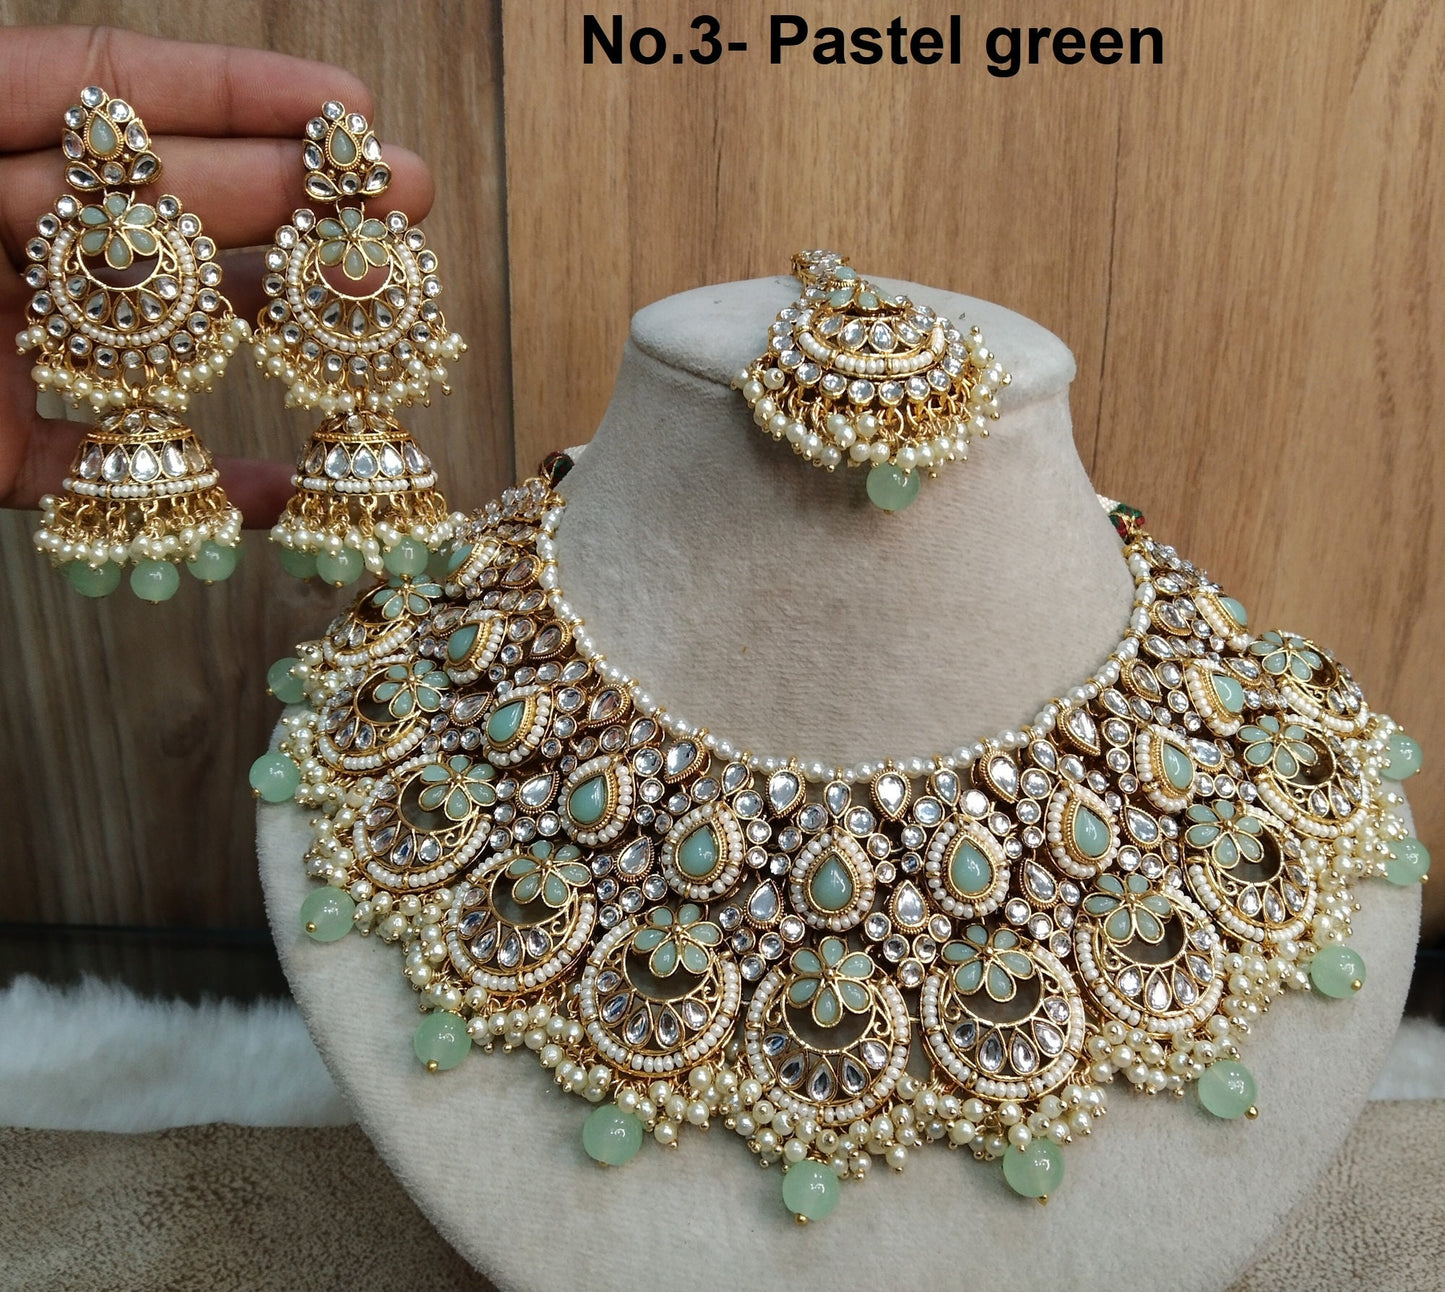 Indian Jewelry/ Gold Bridal Kundan necklace Set Indian gold white, maroon, pastel green,black, peach Bridal Jewellery Harris justin Necklace